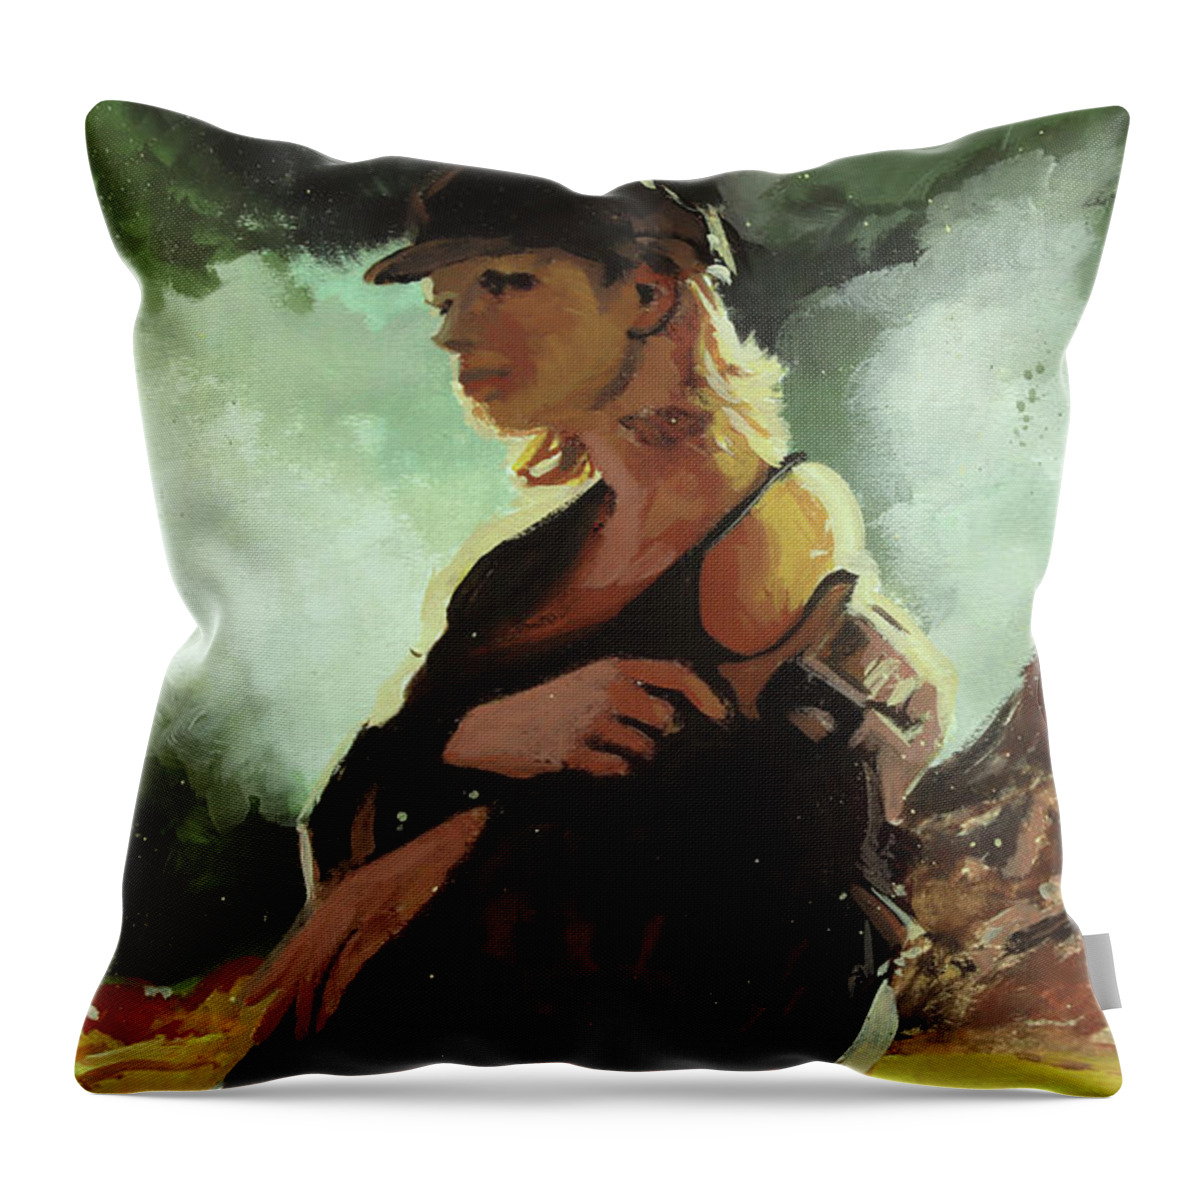 Gothic Throw Pillow featuring the painting Lost Girl by Sv Bell